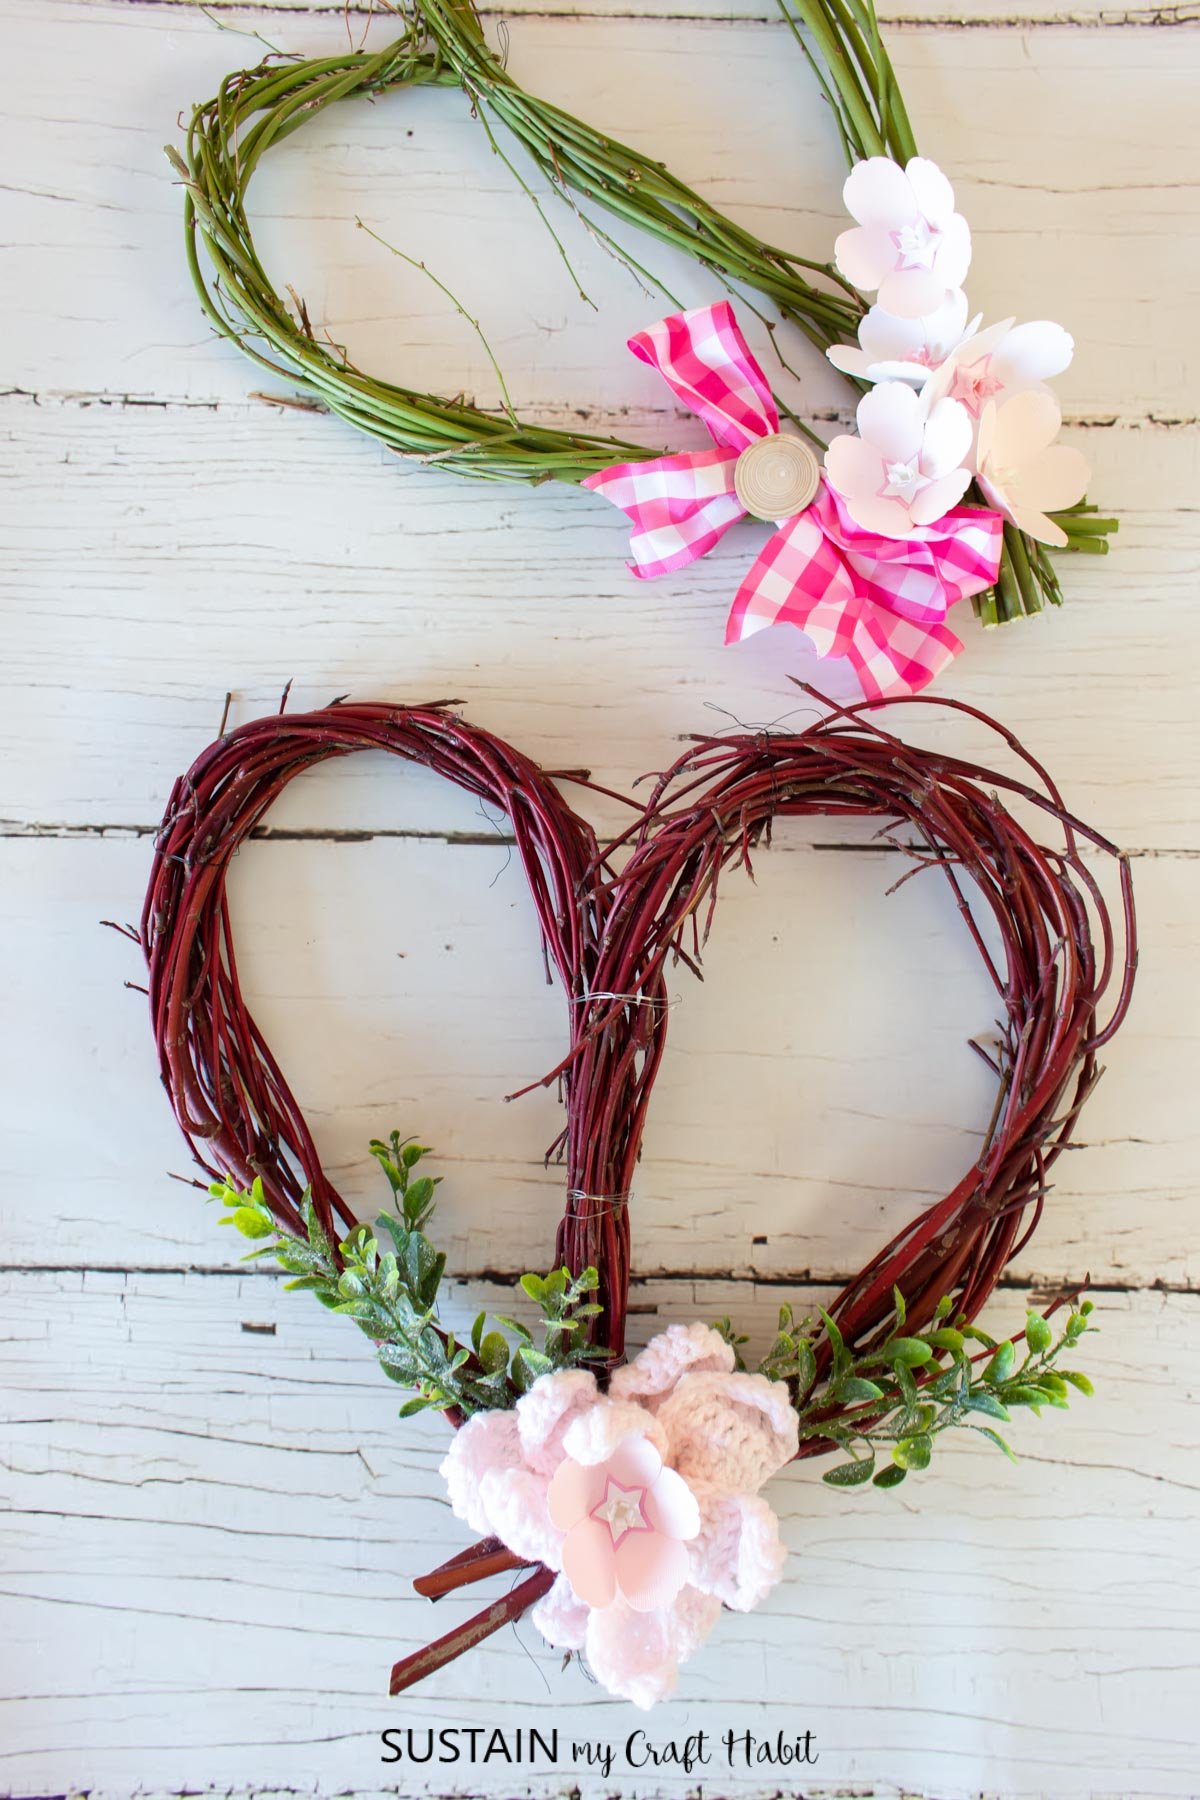 Sweetheart shaped dogwood wreaths embellished with flowers, greenery and ribbon.